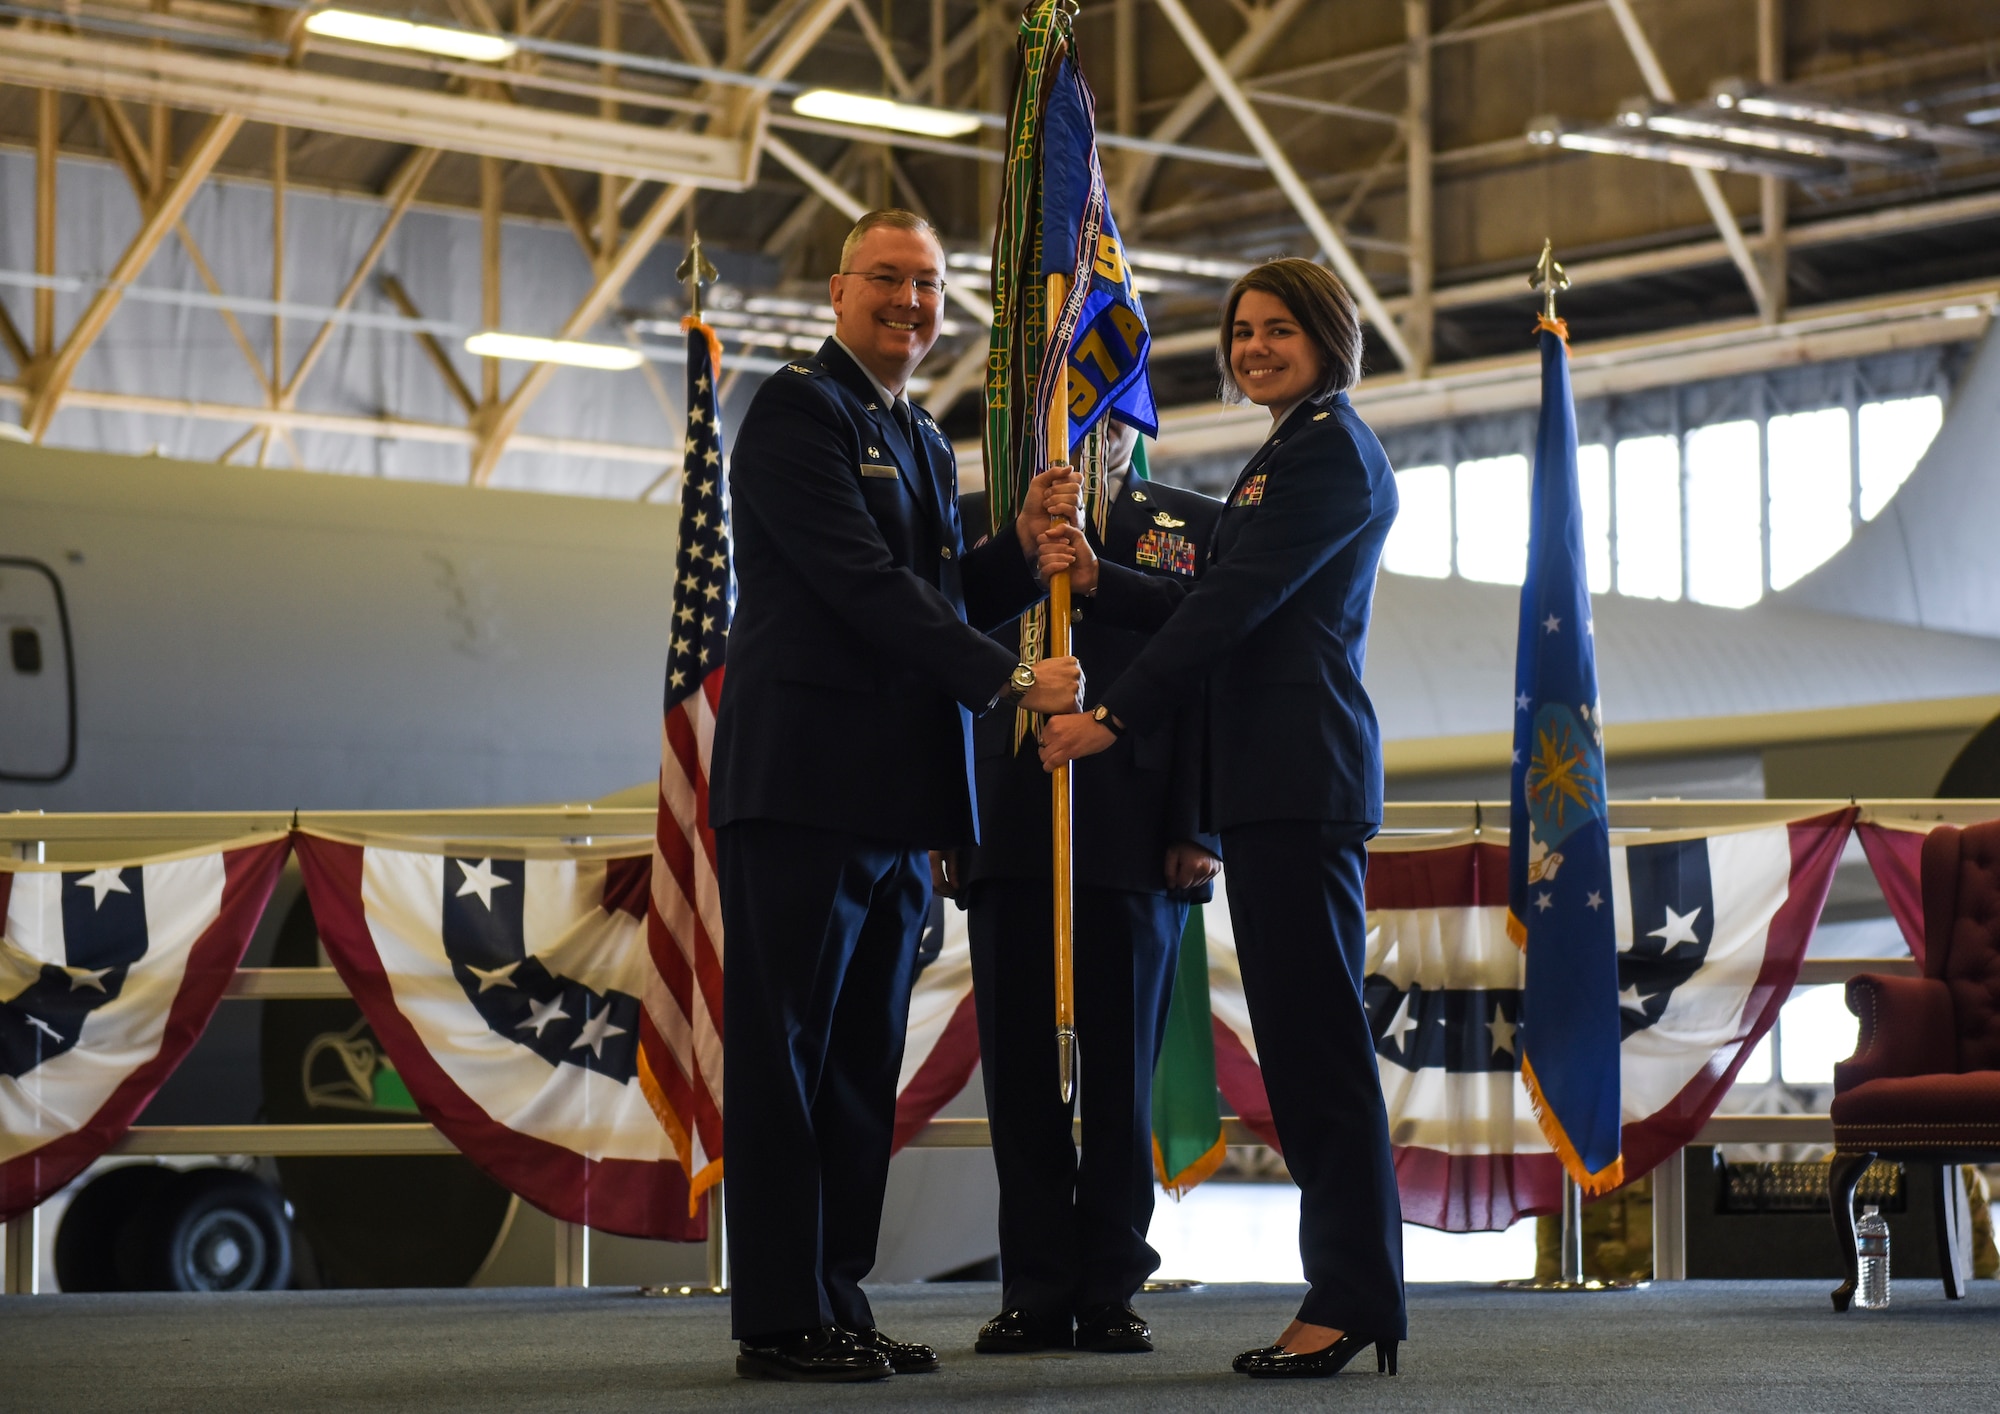 U.S. Air Force Col. Russel Davis, 92nd Operations Group commander, passes the 97th Air Refueling Squadron’s guidon to Lt. Col. Cindy Dawson, 97th ARS incoming commander, during the squadron’s reactivation ceremony and Assumption of Command at Fairchild Air Force Base, Washington Oct. 18, 2019.